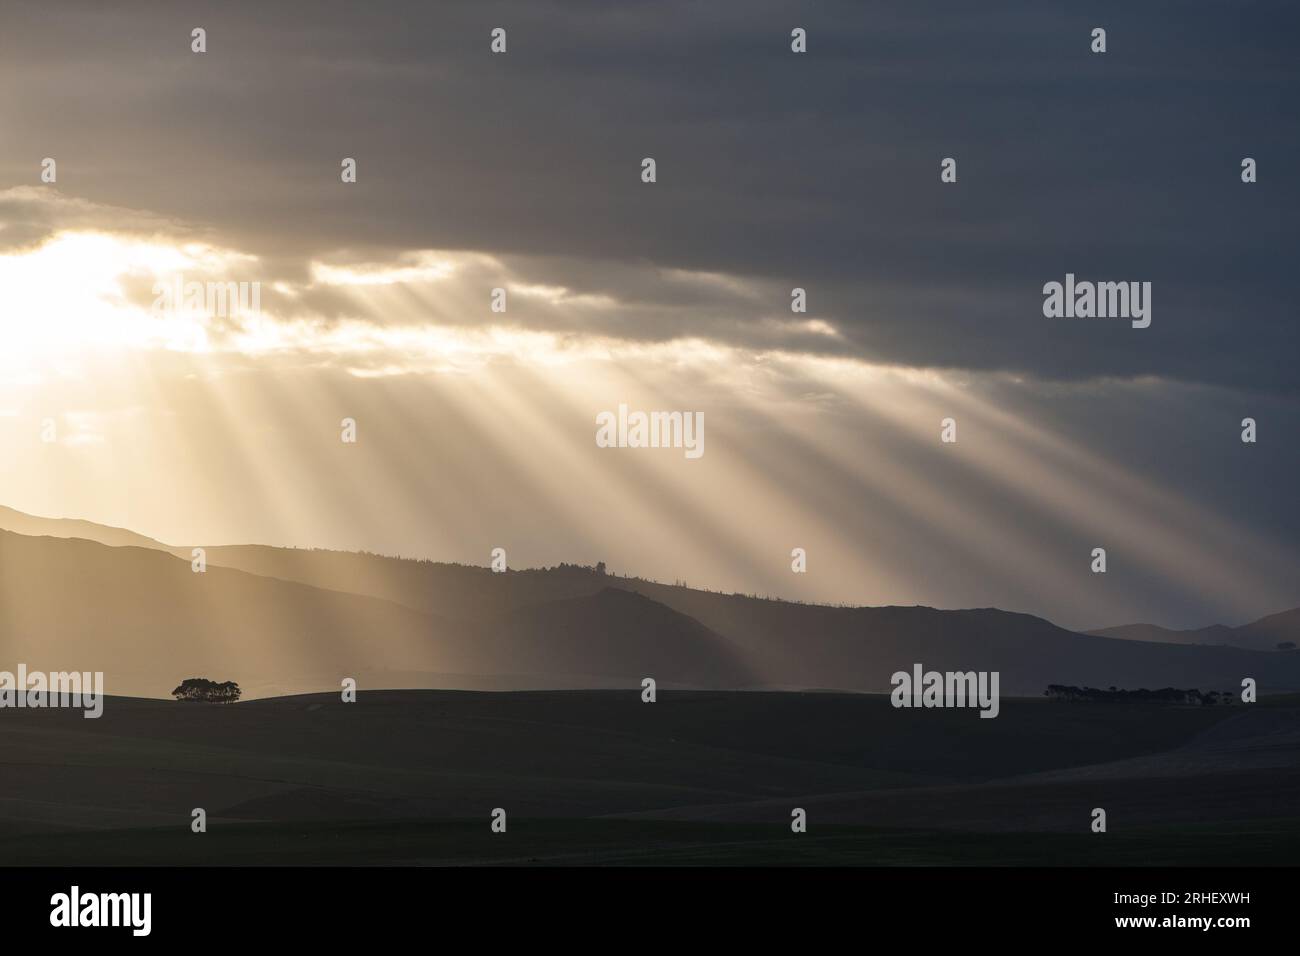 Rays of sun breaking breaking through clouds in the distance at the end of the day over Stock Photo